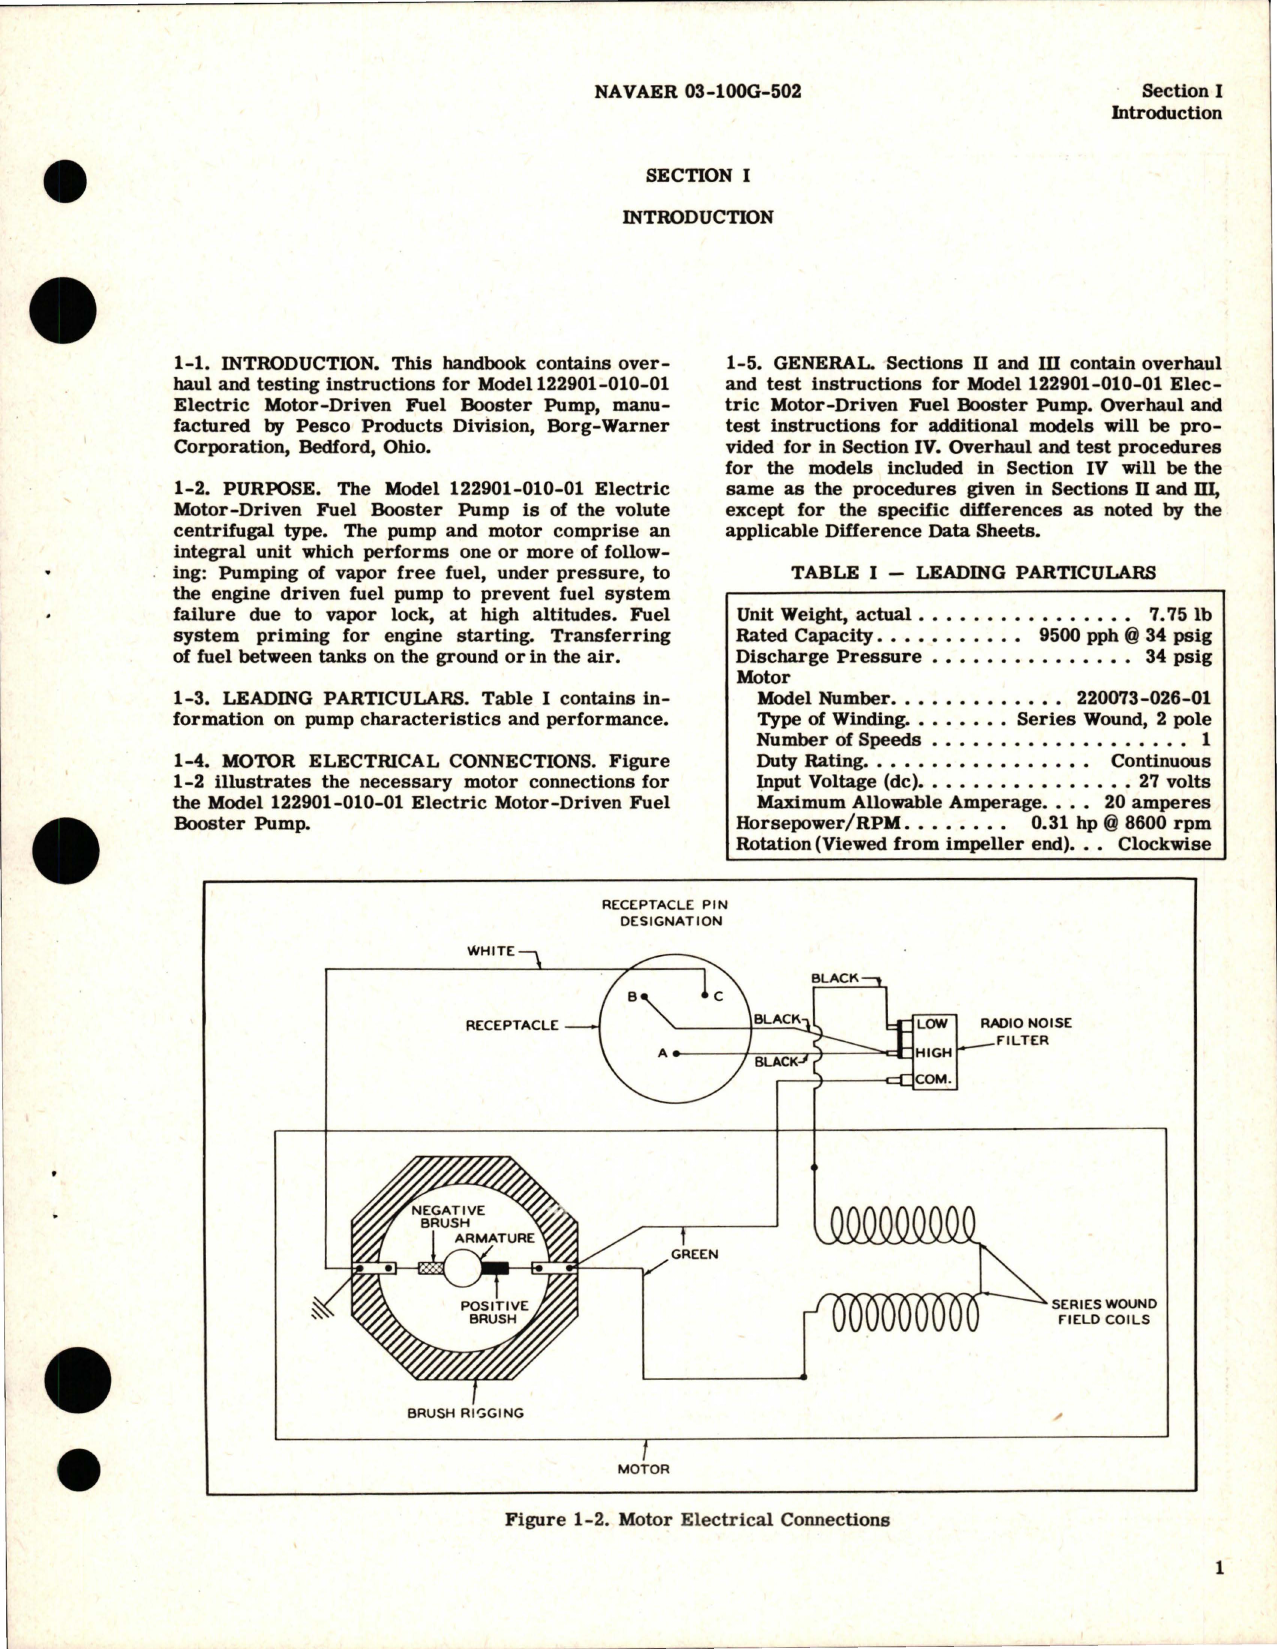 Sample page 5 from AirCorps Library document: Overhaul Instructions for Line Mounted Motor-Driven Fuel Booster Pump Assembly - Model 122901-010-01 